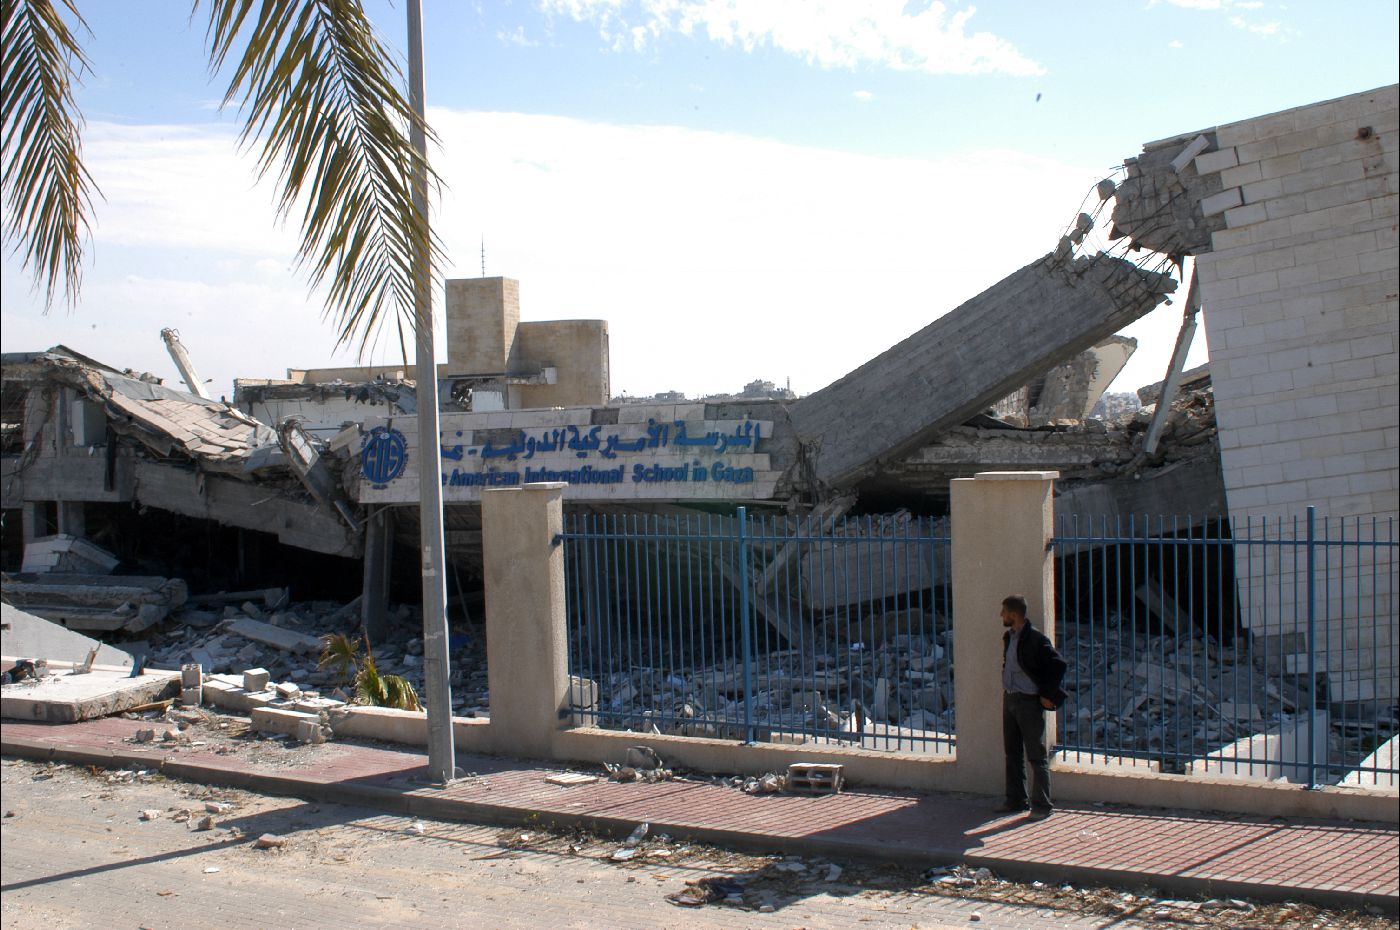 School in Beit Lahia destroyed during the “Cast Lead” offensive. April 2009, Photo by JCTordai